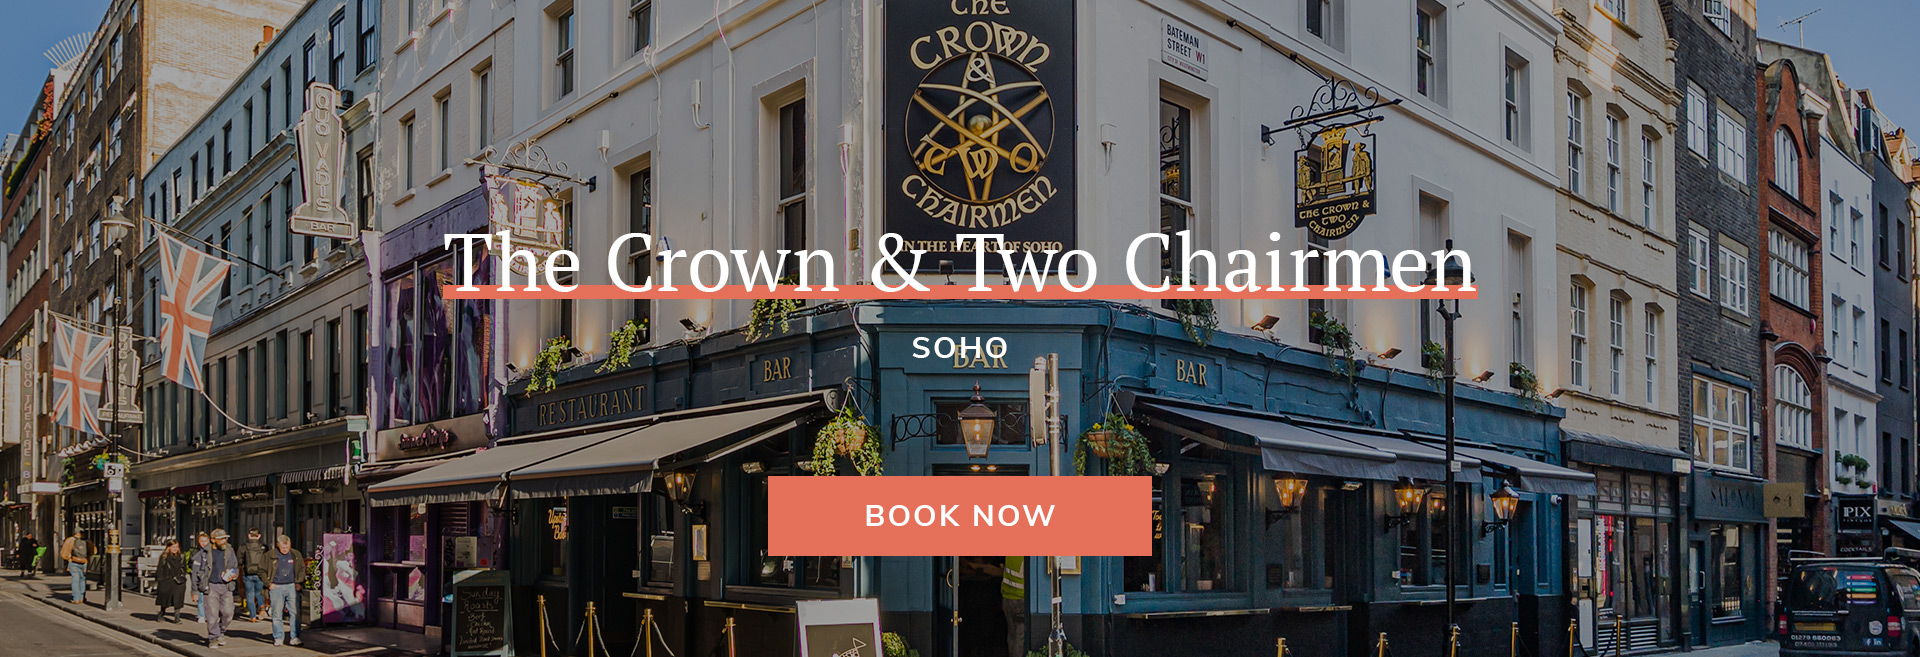 The Crown & Two Chairmen Banner 1